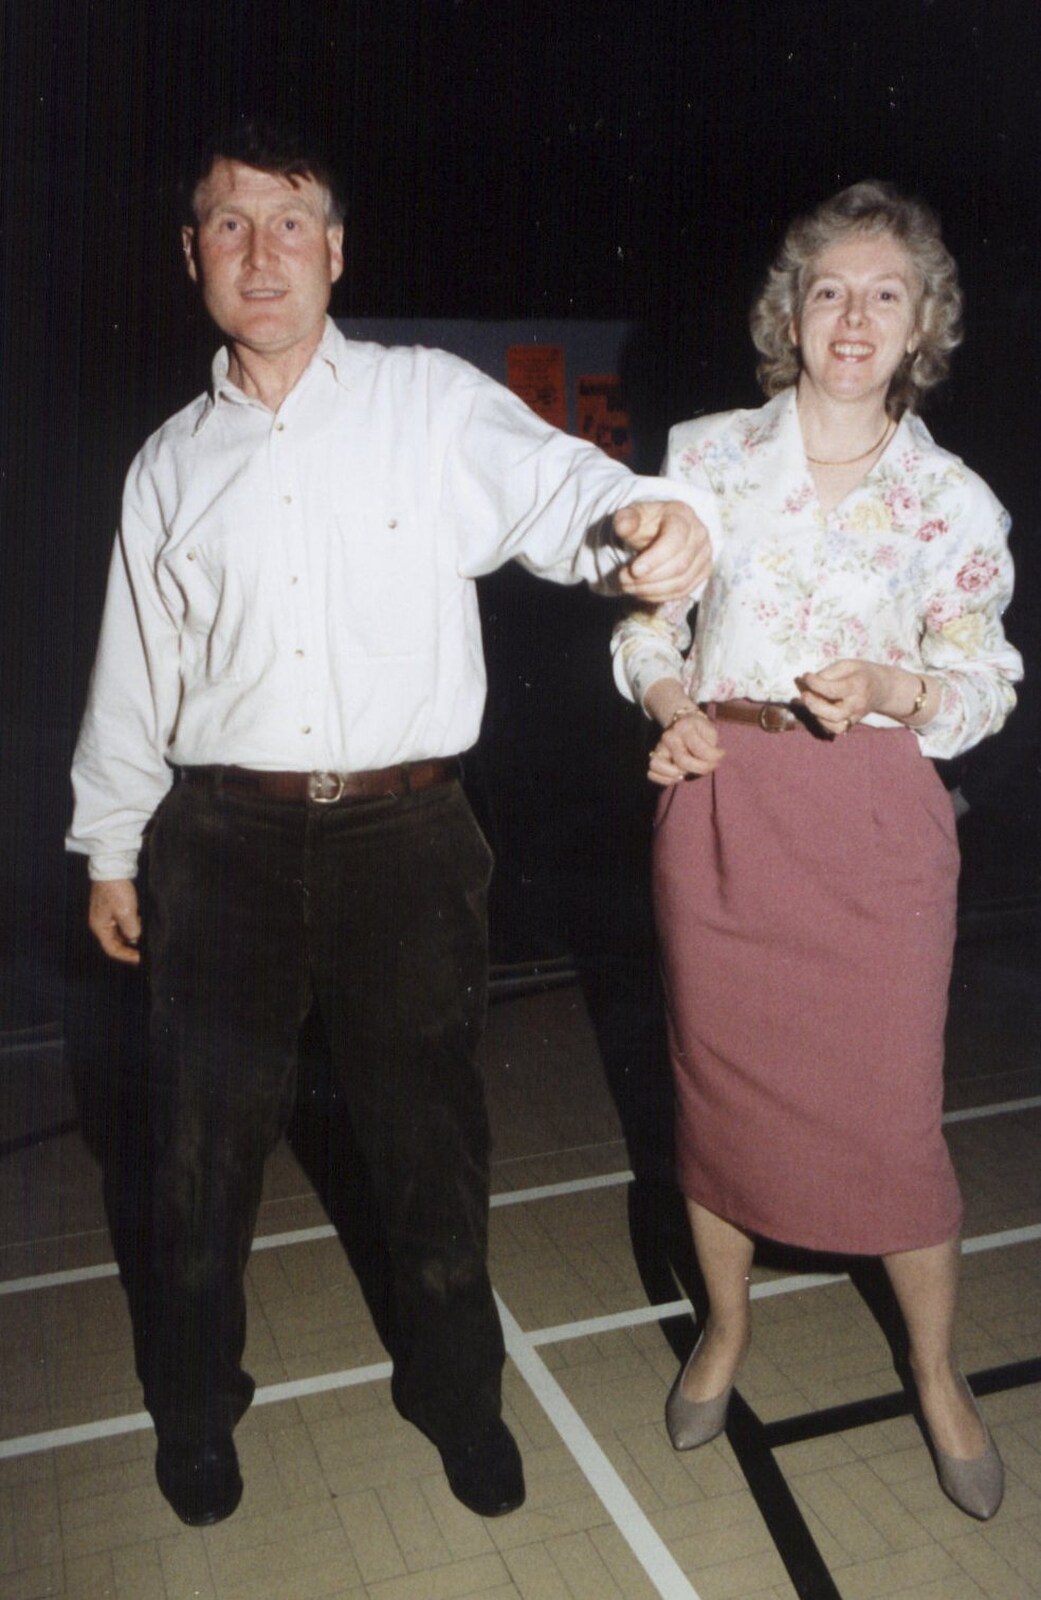 Bernie and Jean dance around from Bernie and the Porch, The Stables, Stuston, Suffolk - 15th March 1991